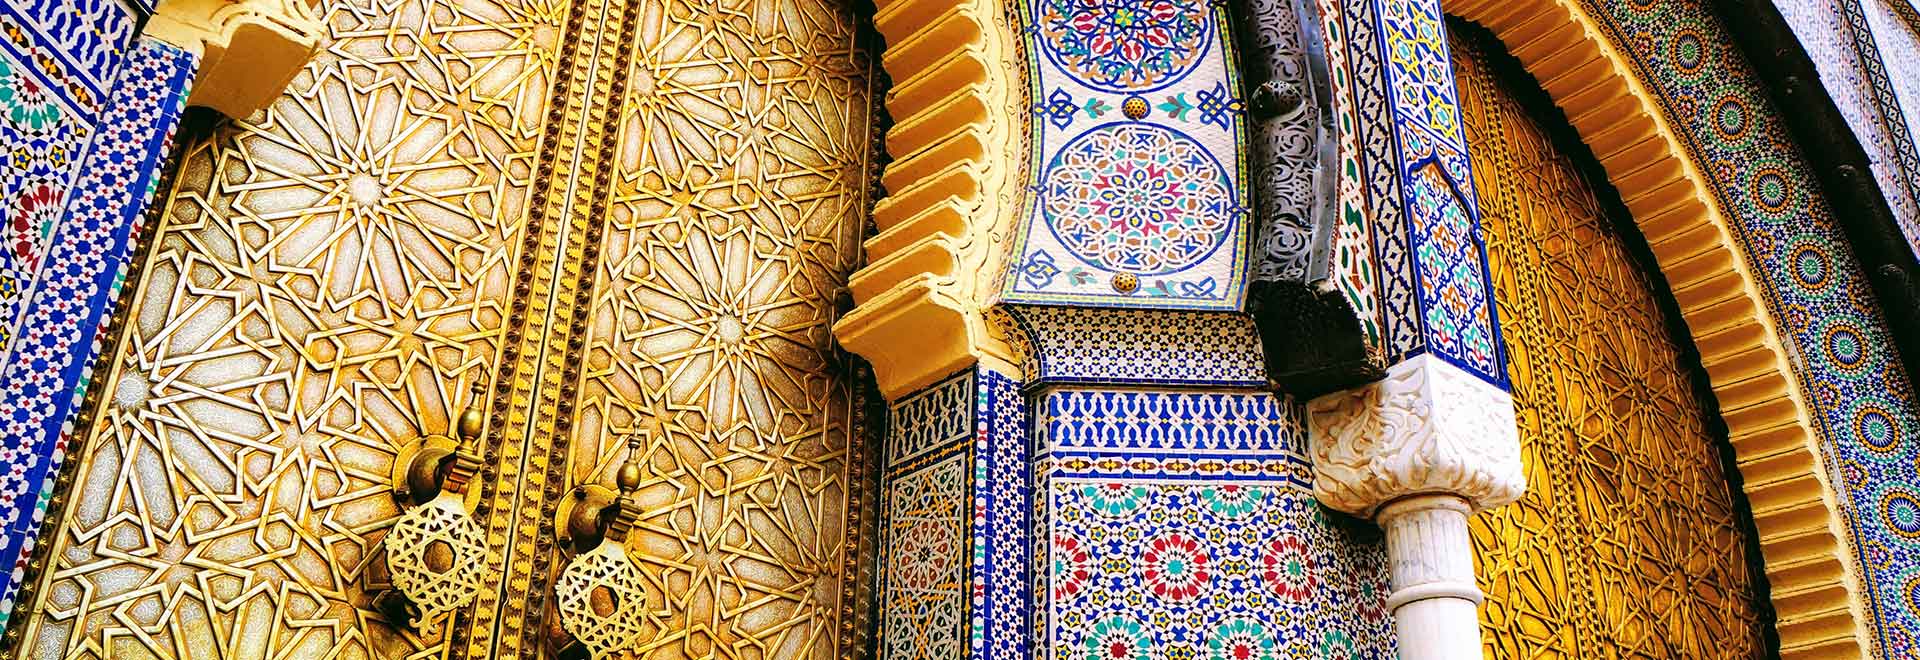 Visit Middle East Morocoo Royal Palace Rabat MH on our Luxury Morocco Tours